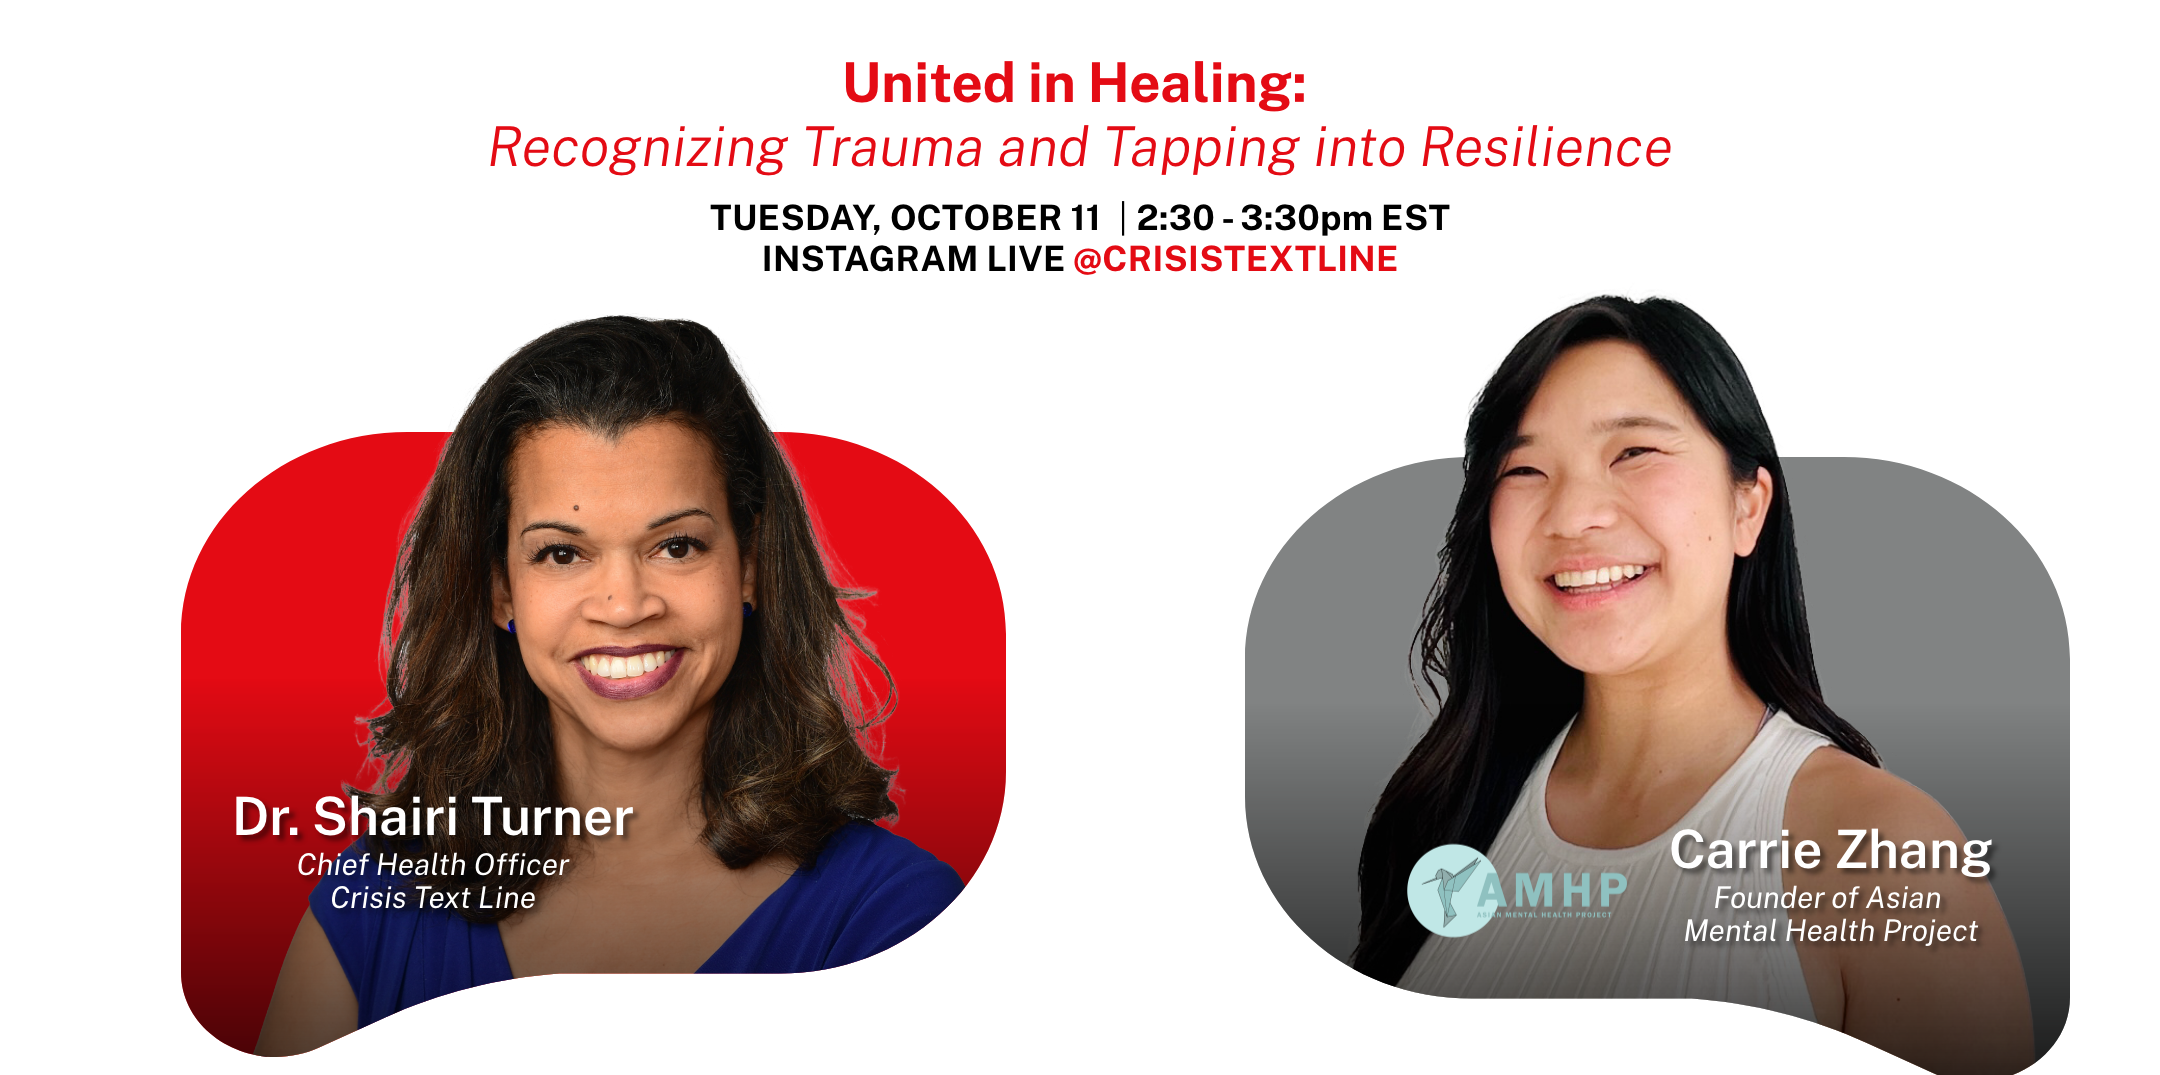 United in Healing: Recognizing trauma and tapping into resilience